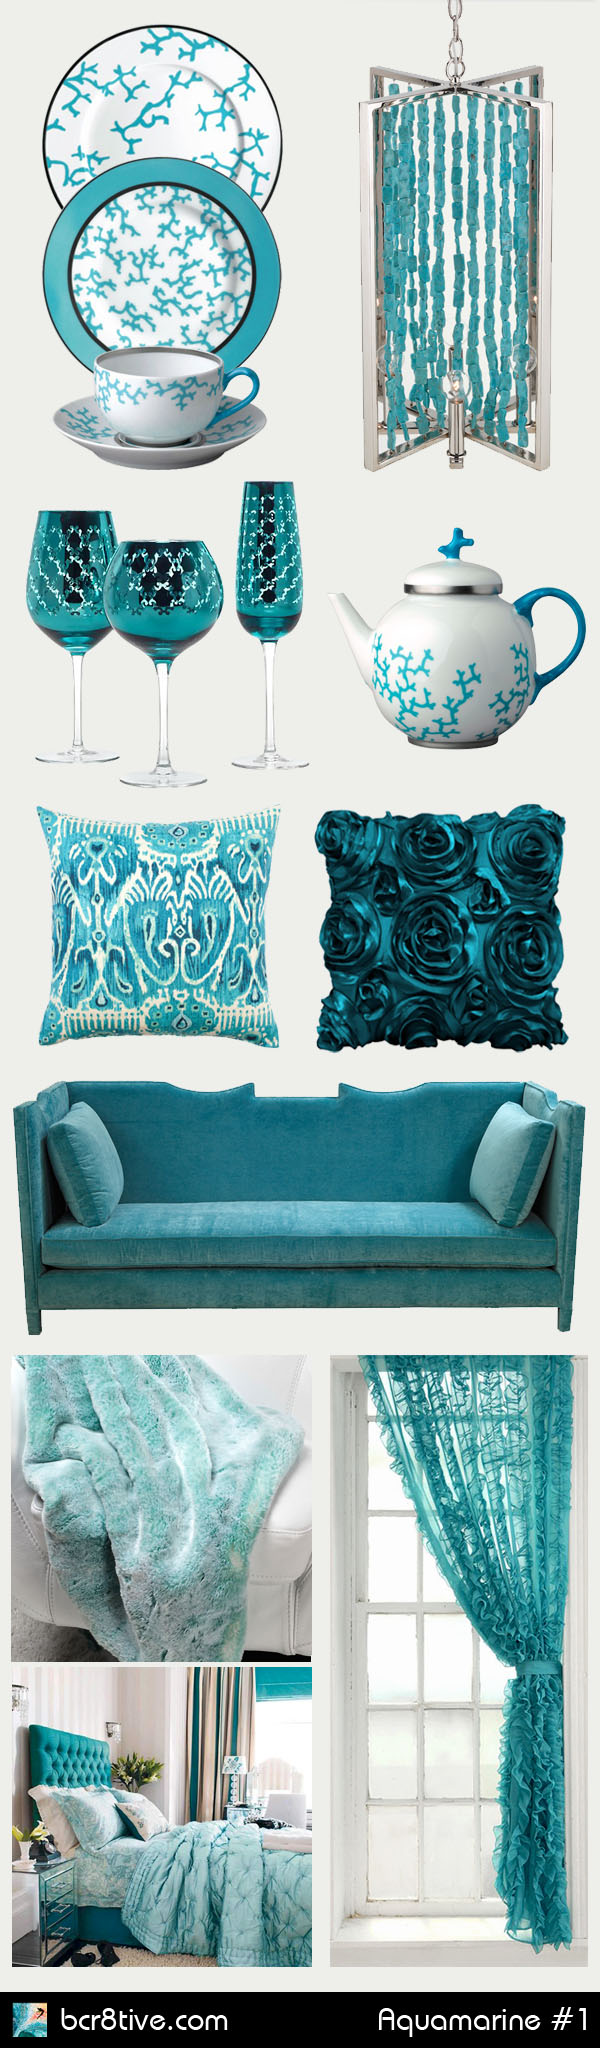 Home Decorating with Aquamarine & Turquoise - bcr8tive